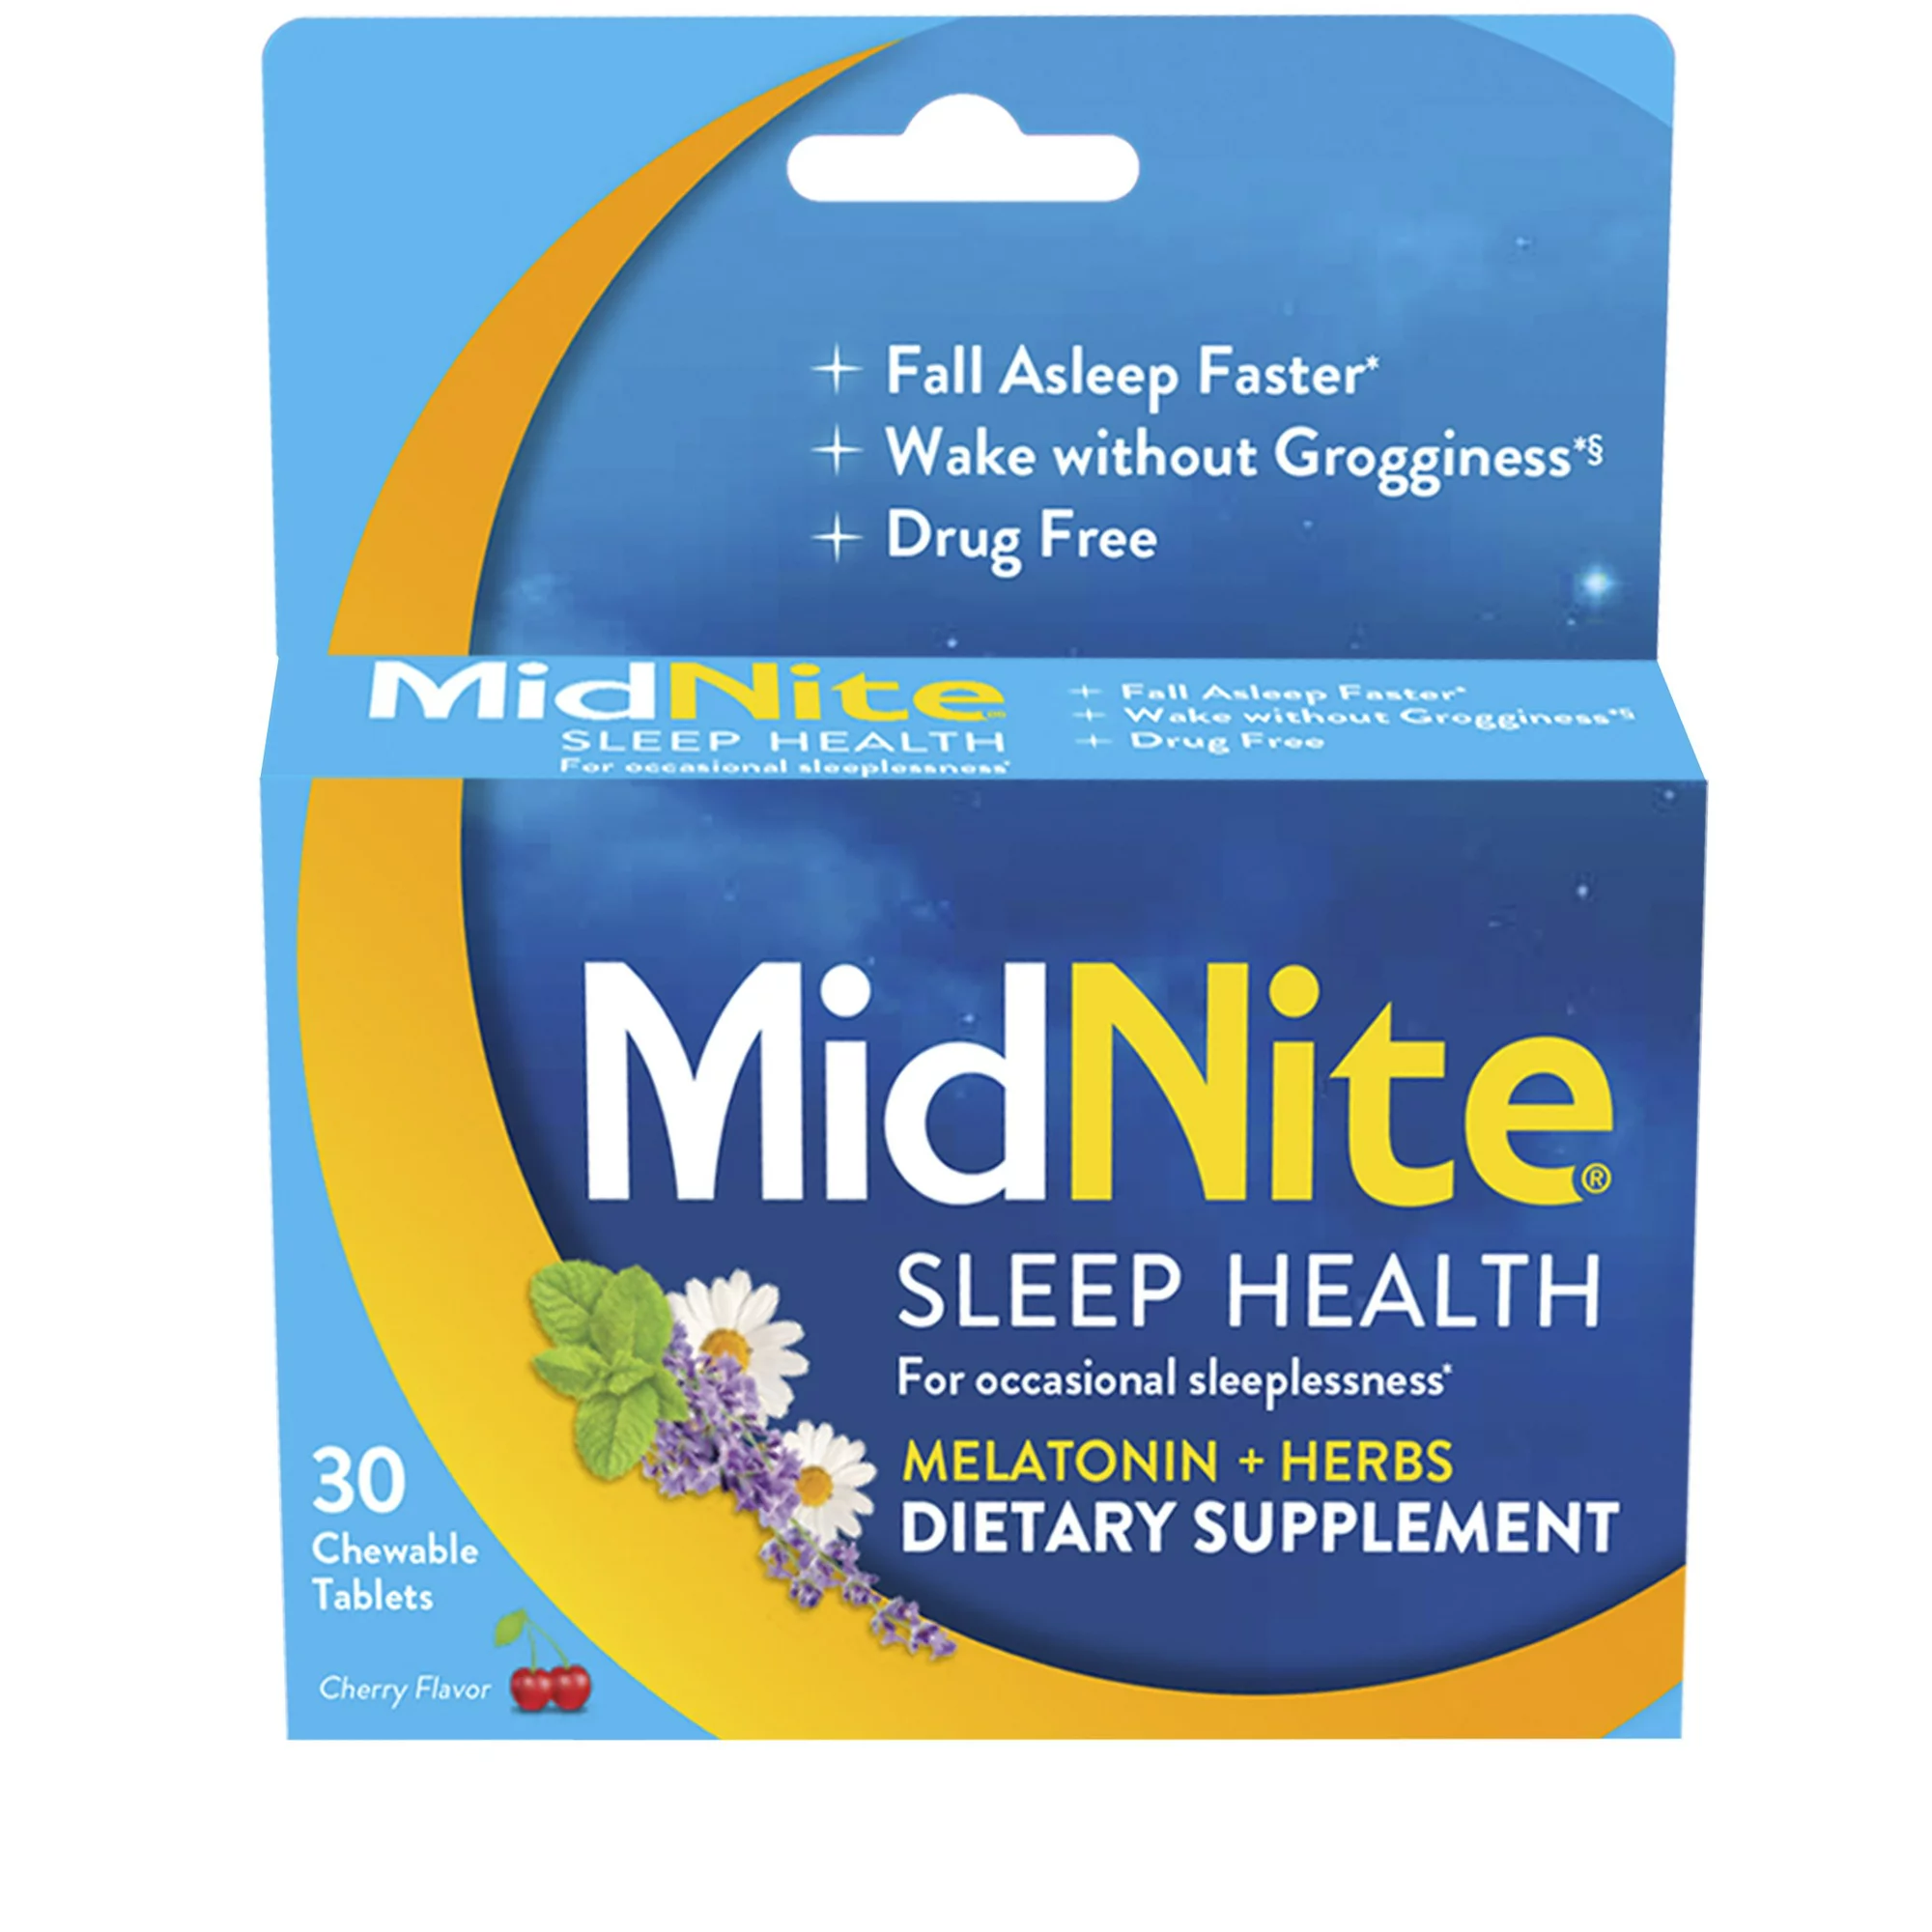 Sleep soundly and save with MIDNITE product!